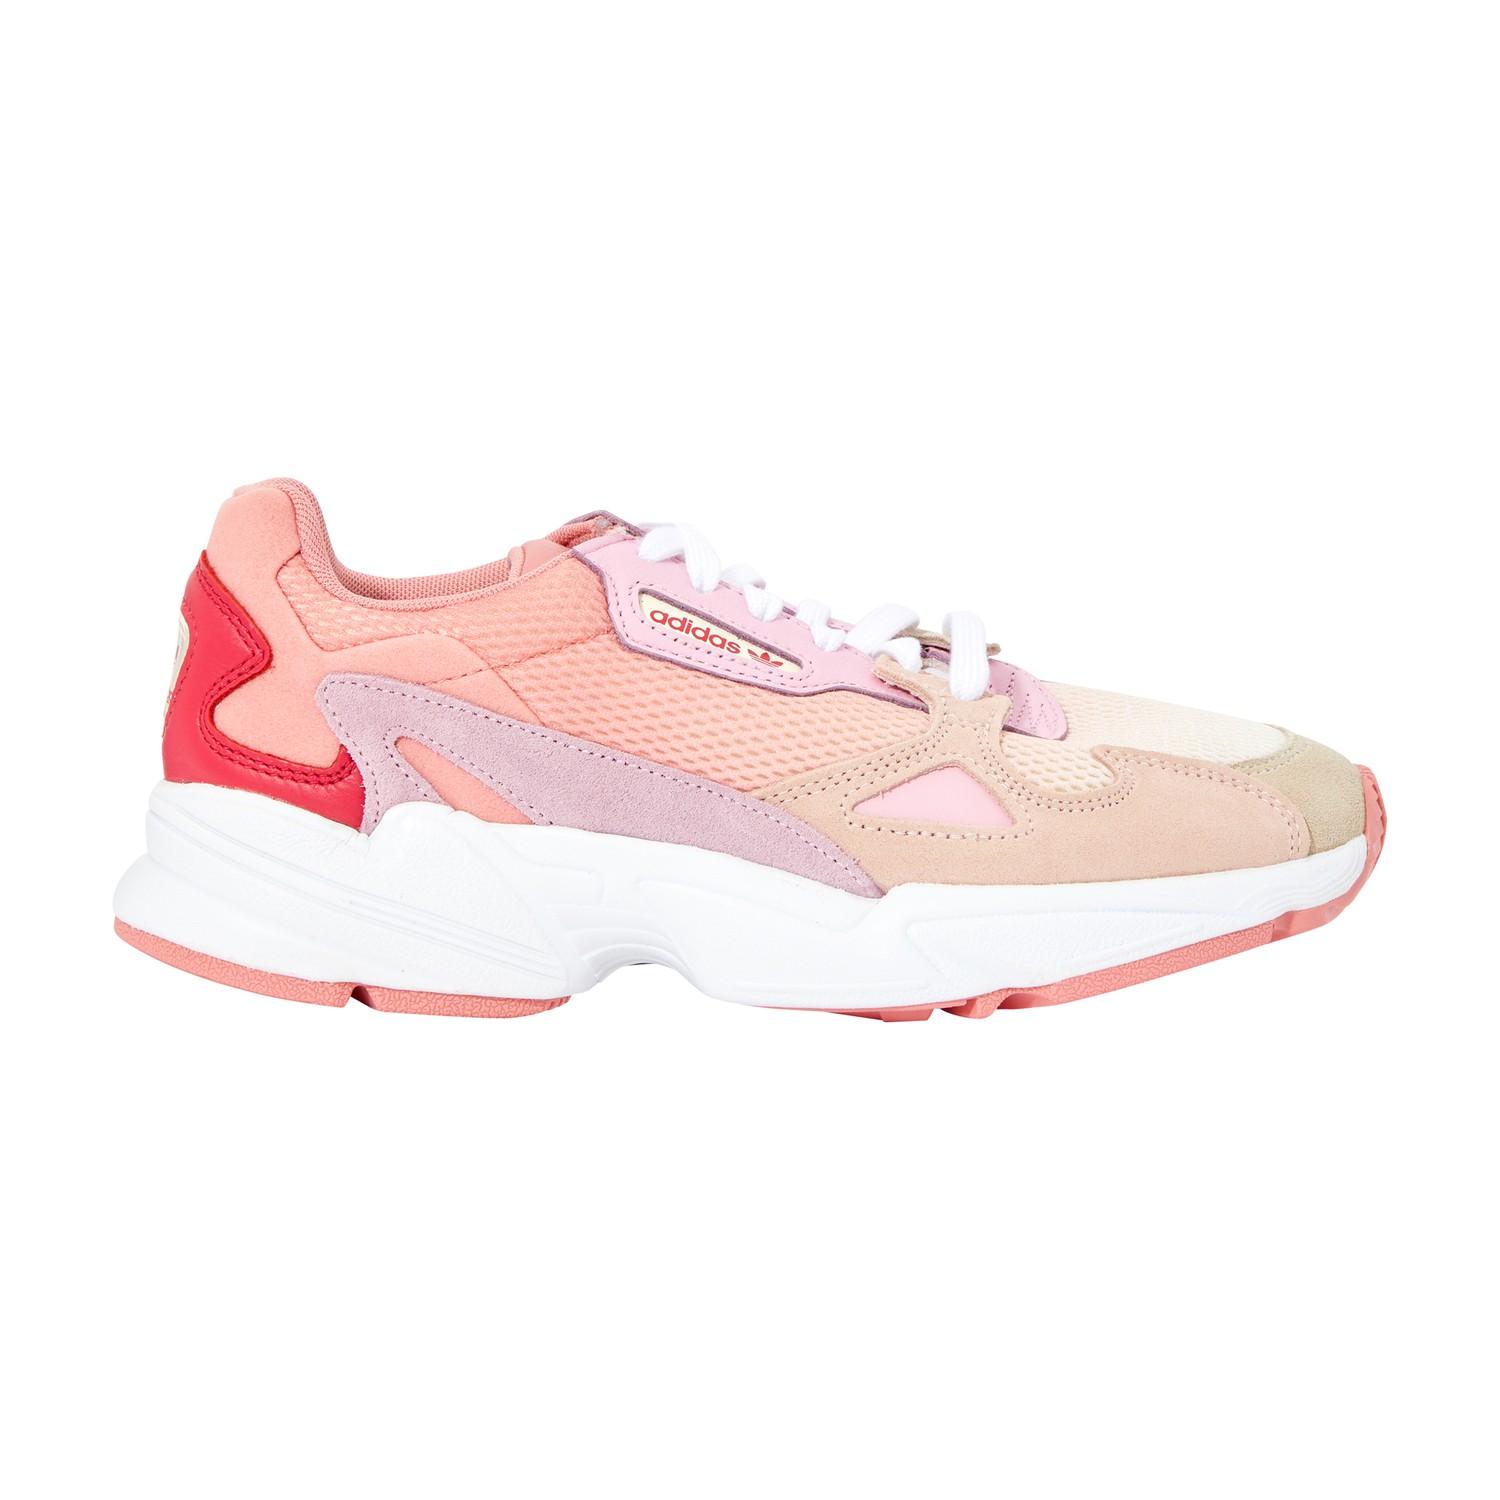 adidas Originals Falcon Trainers in Pink - Lyst